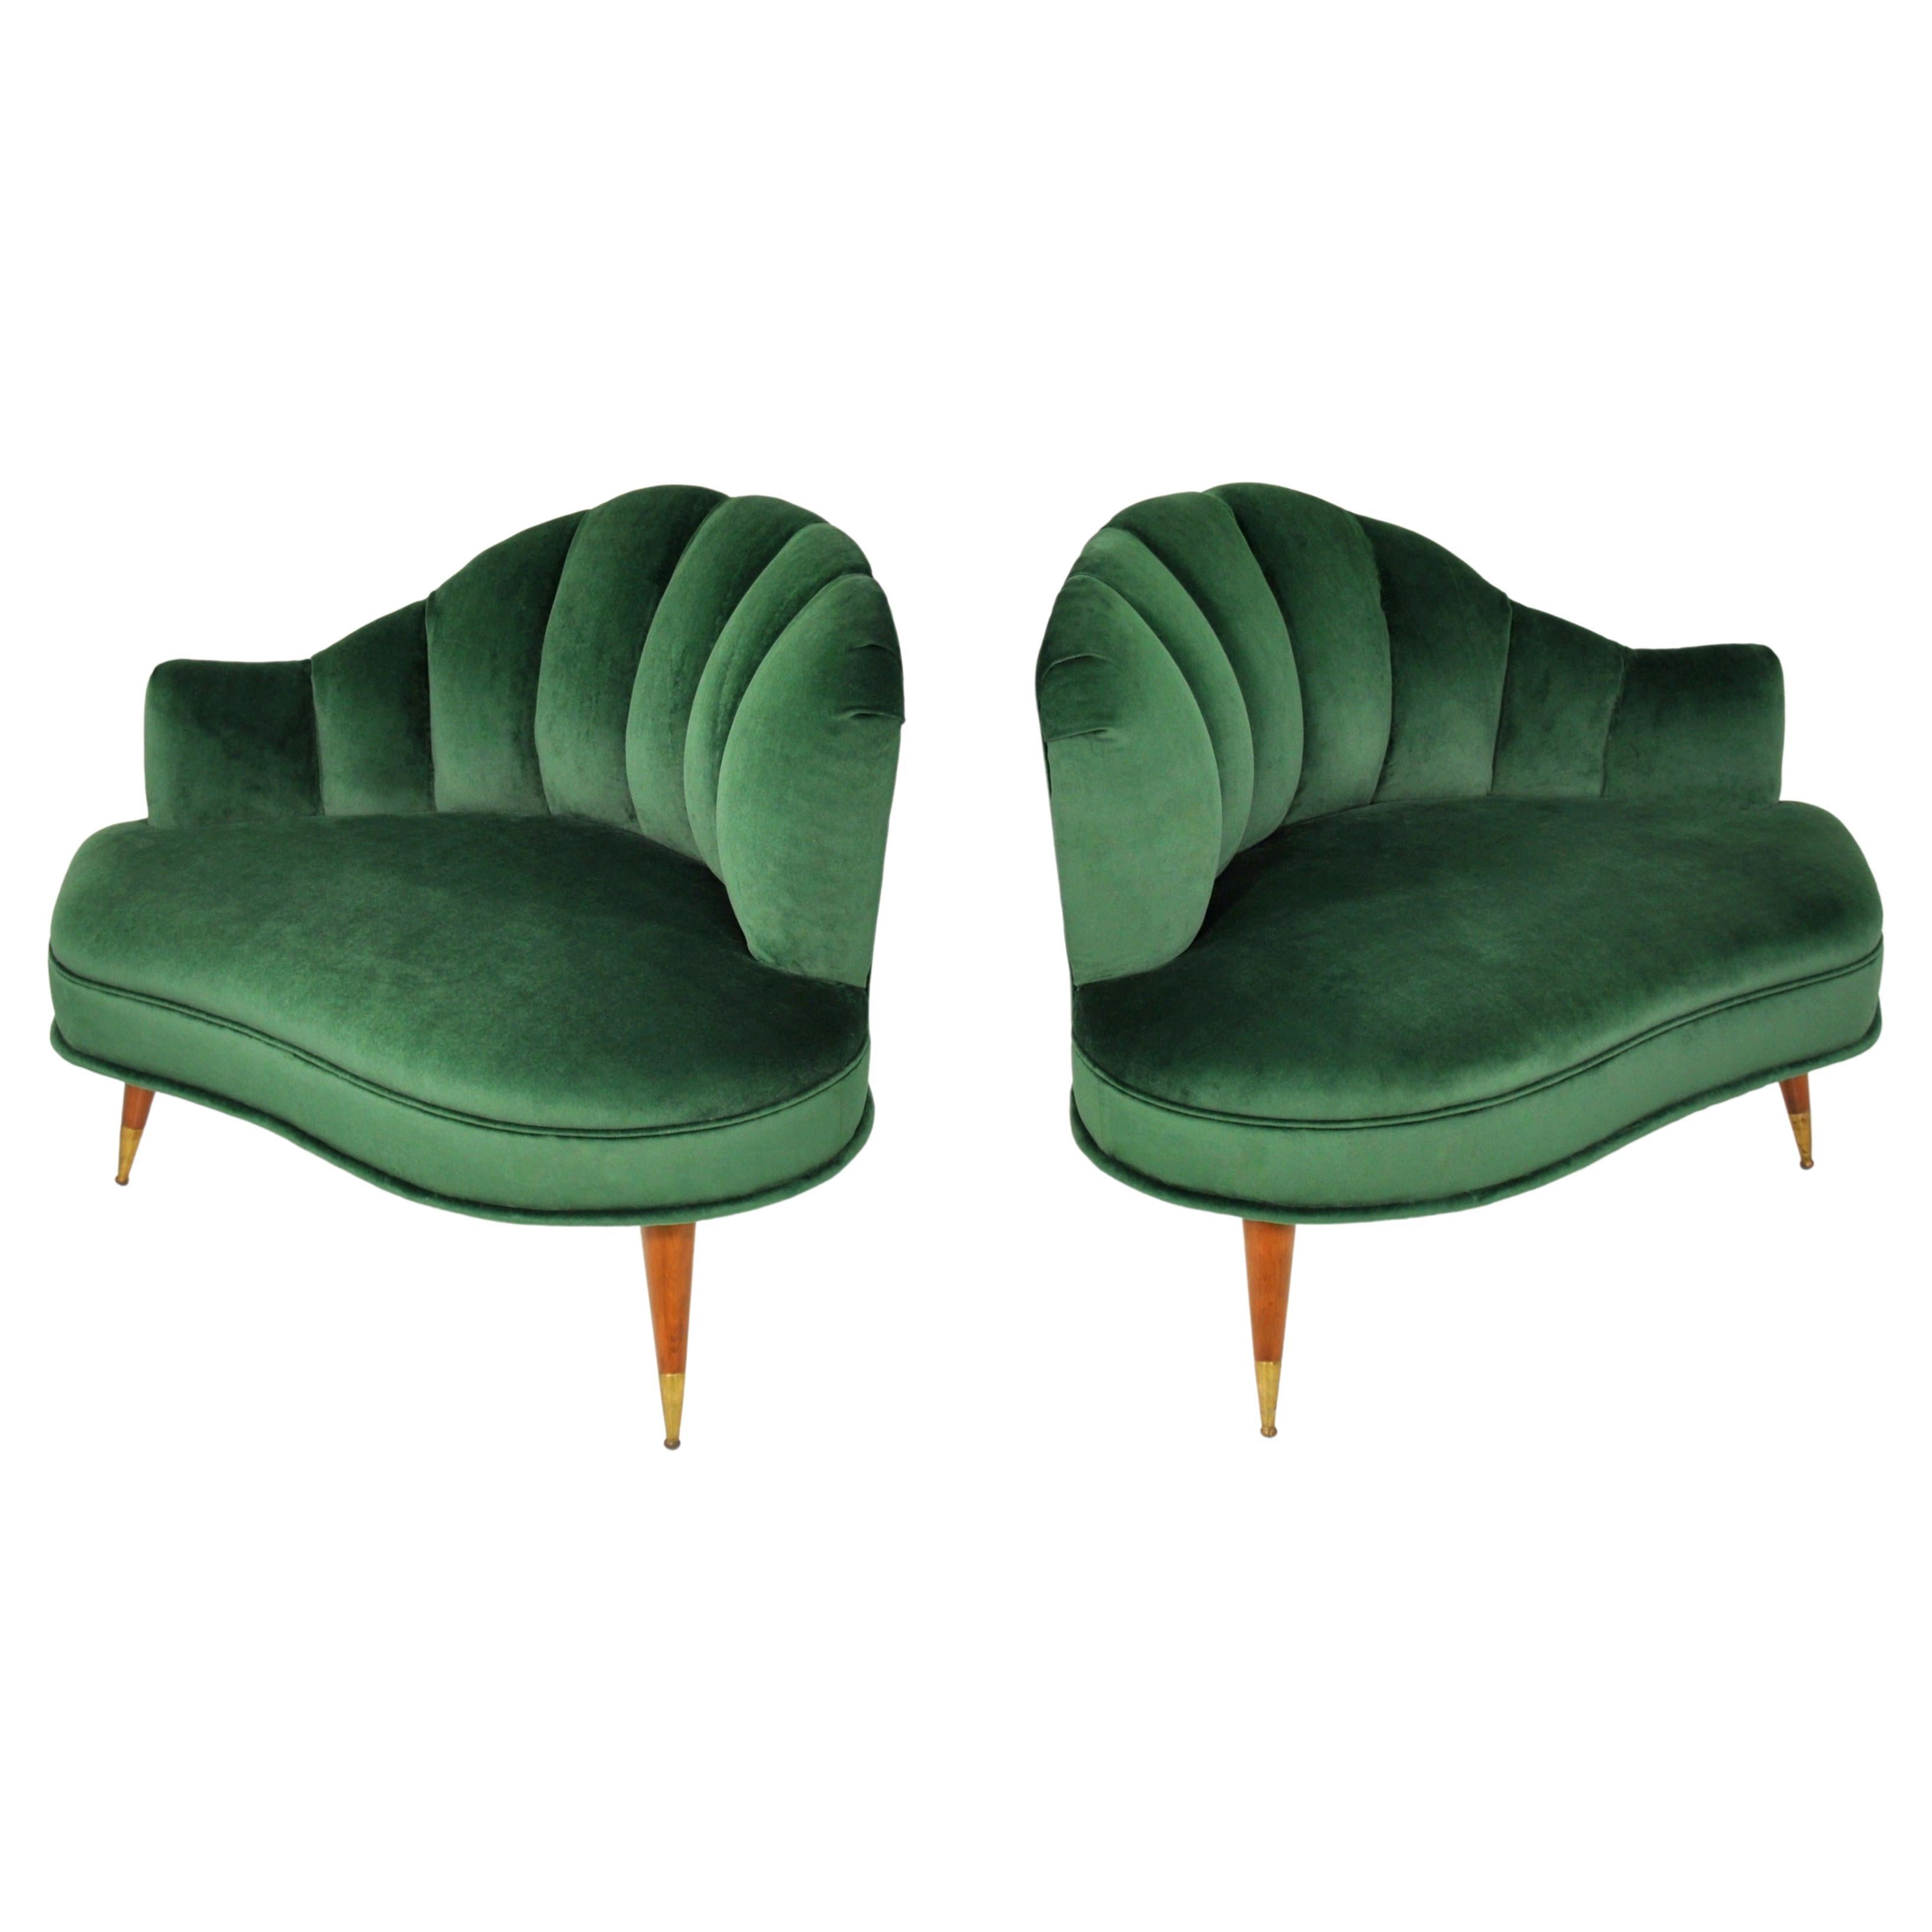 Hollywood Regency Mid-Century Modern Channel Back Lounge Chairs - Pair For Sale